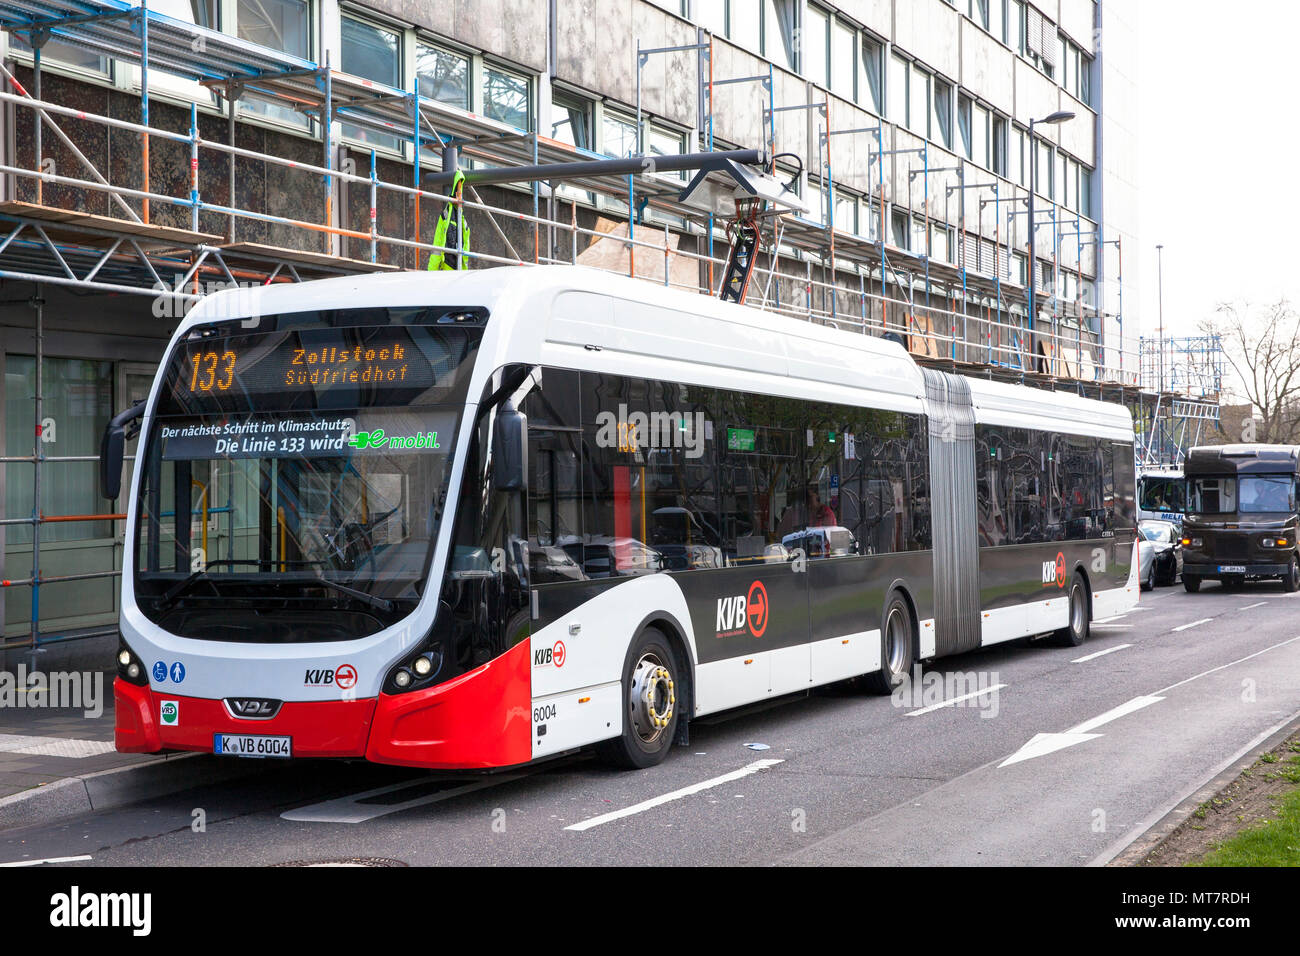 electric bus of the line 133 at a charging station at Breslauer Platz, Cologne, Germany.  Elektrobus der Linie 133 an einer Ladestation am Breslauer P Stock Photo